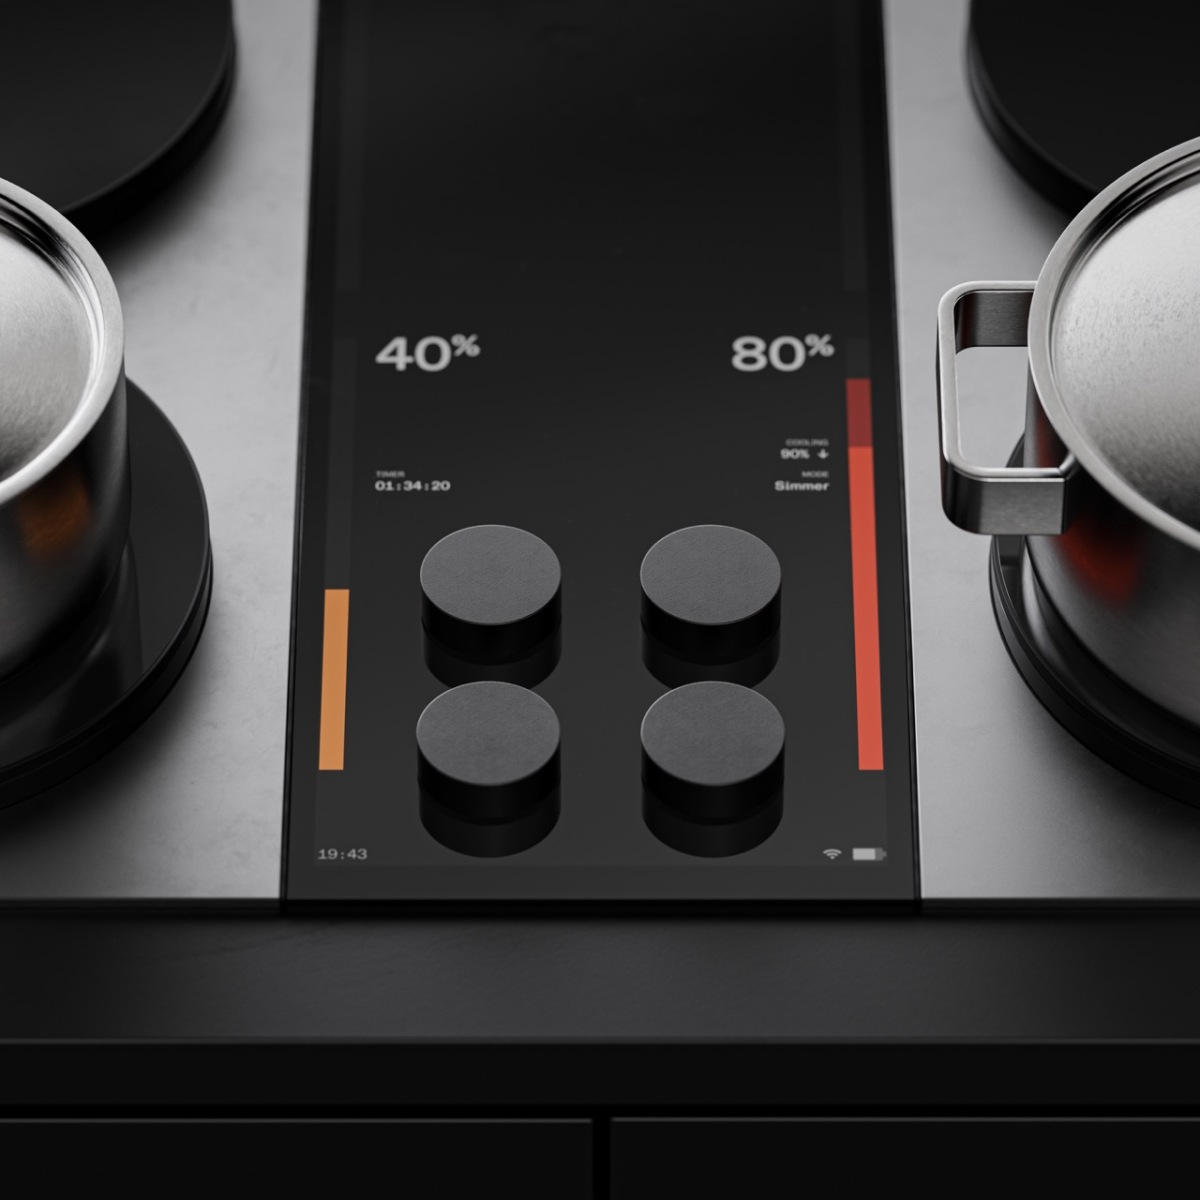 High-precision induction stove startup Impulse powers up with $20M Series A • ZebethMedia